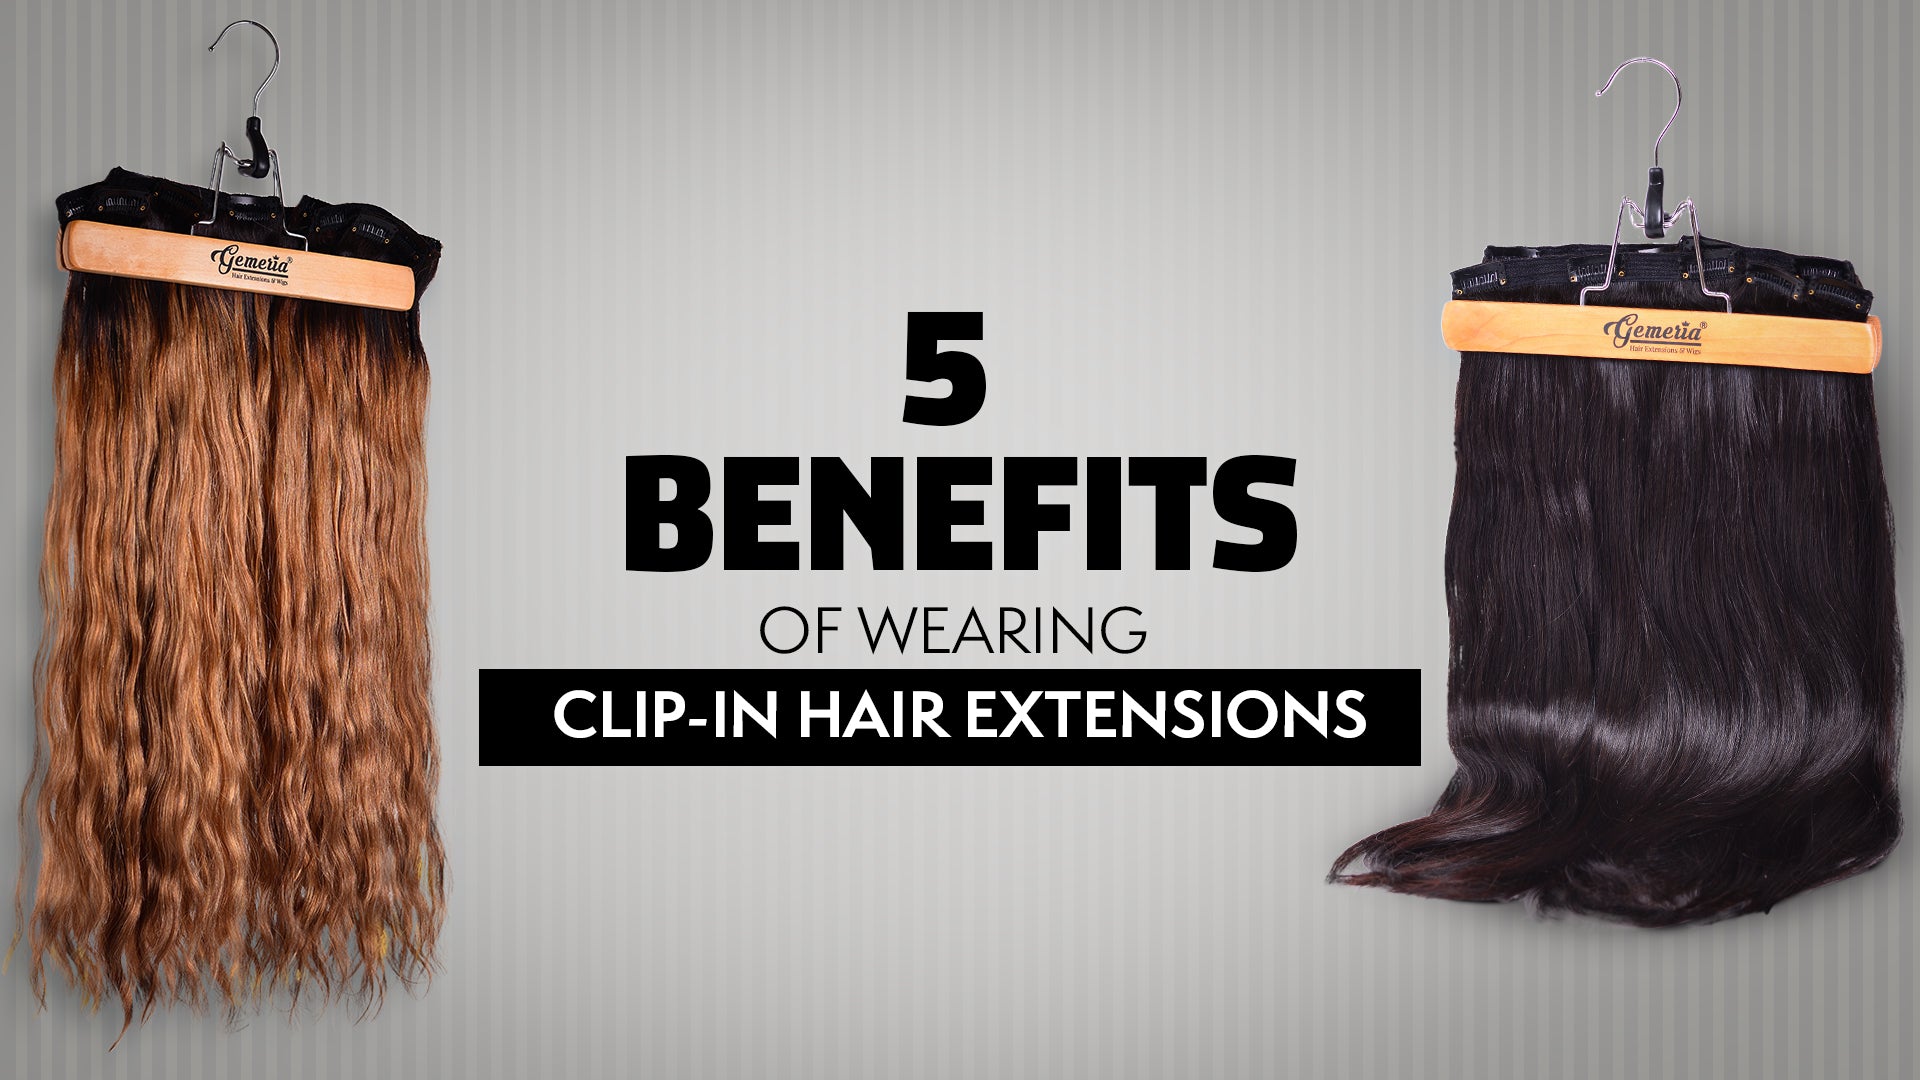 Clip-in hair extensions